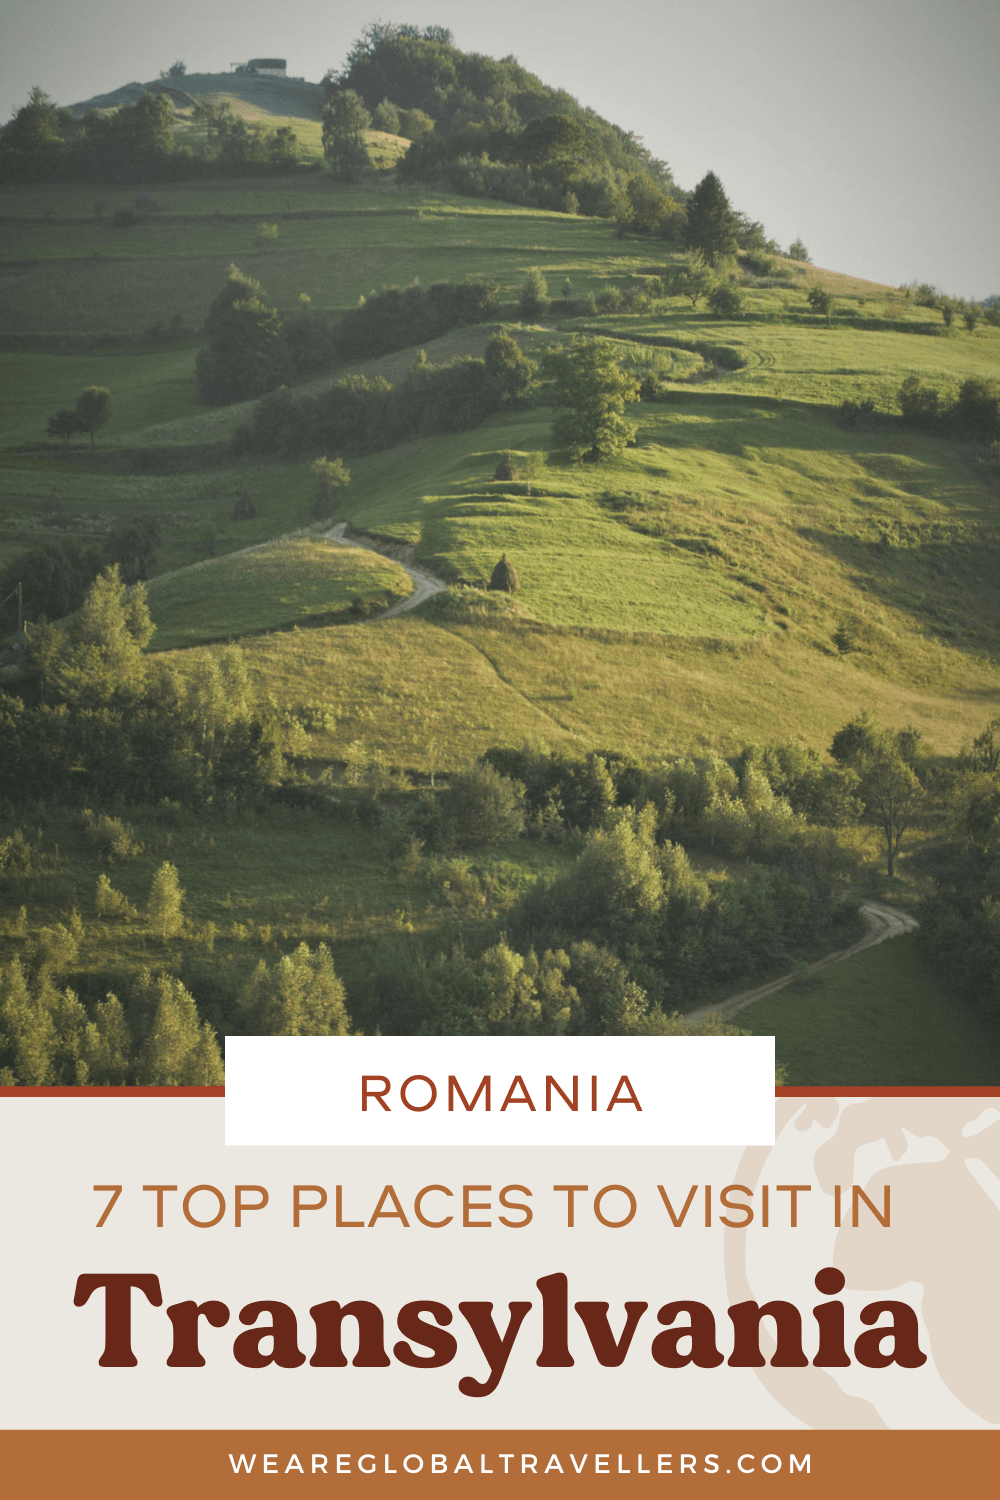 The best places to visit in Transylvania